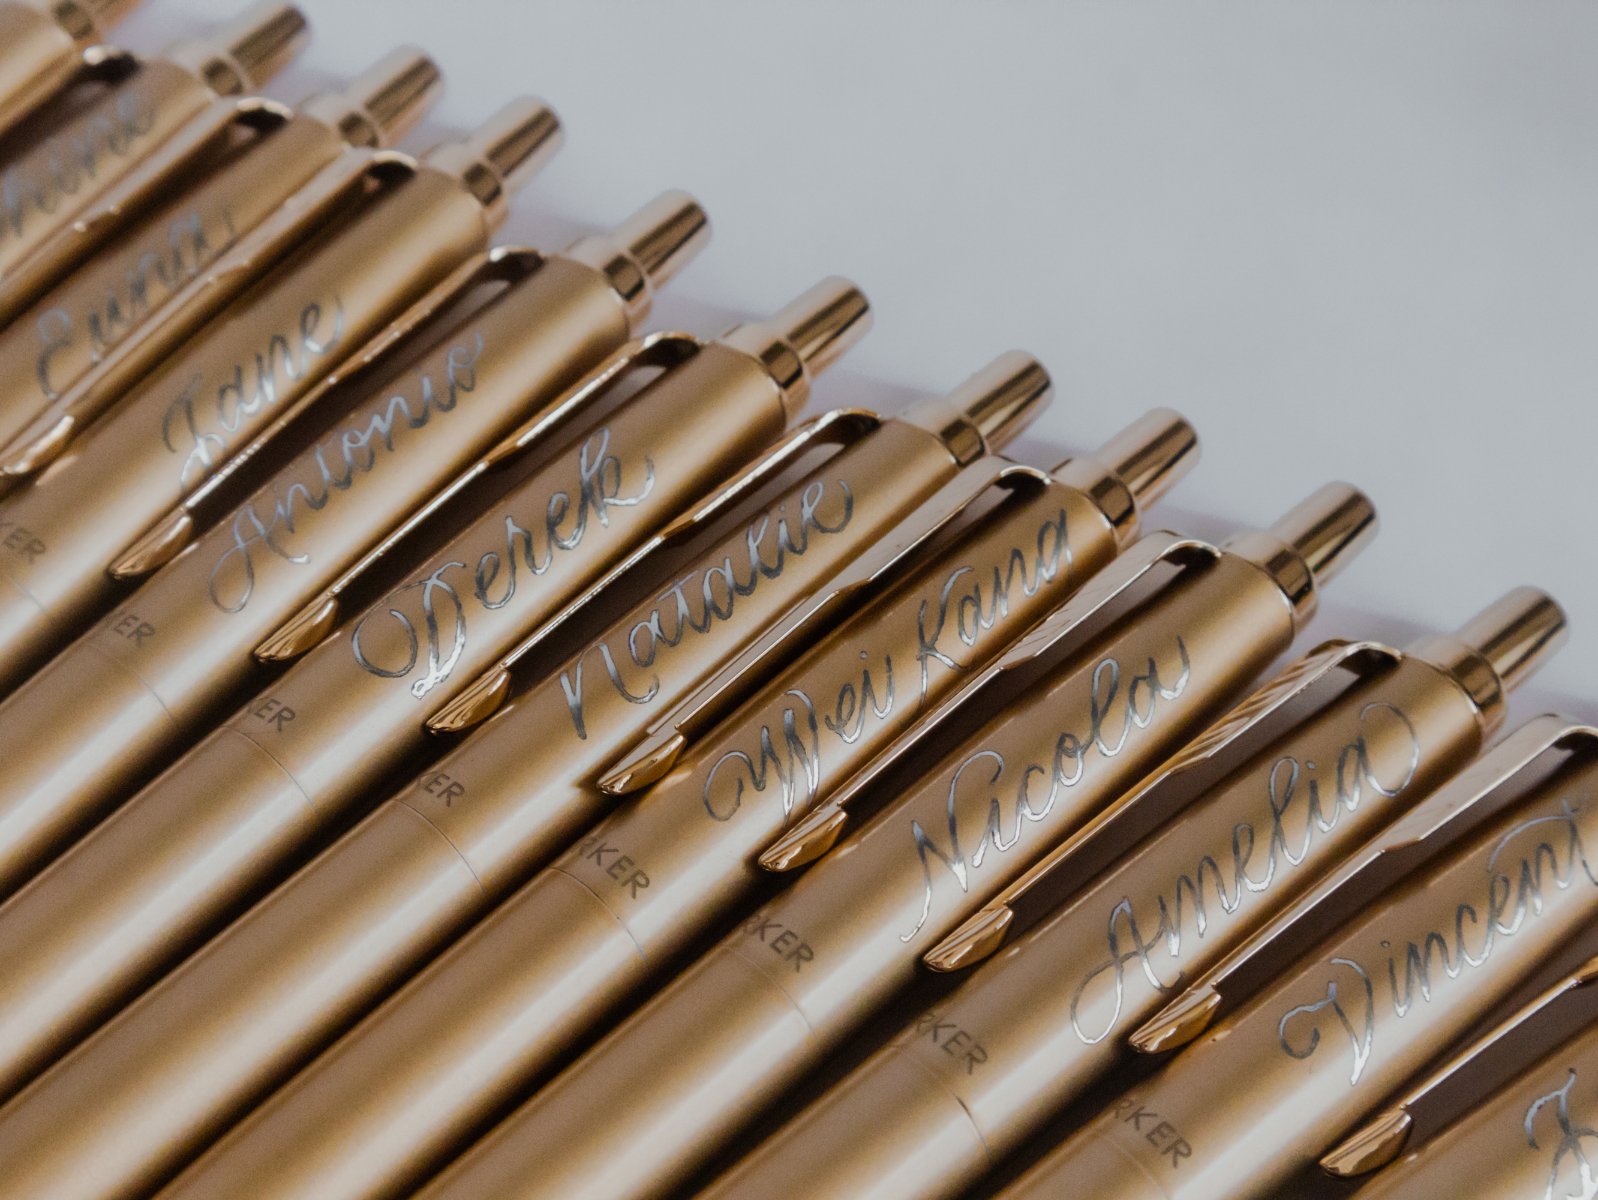 First Name Calligraphy Engraving on Parker Pens for Bloomberg 9.jpg